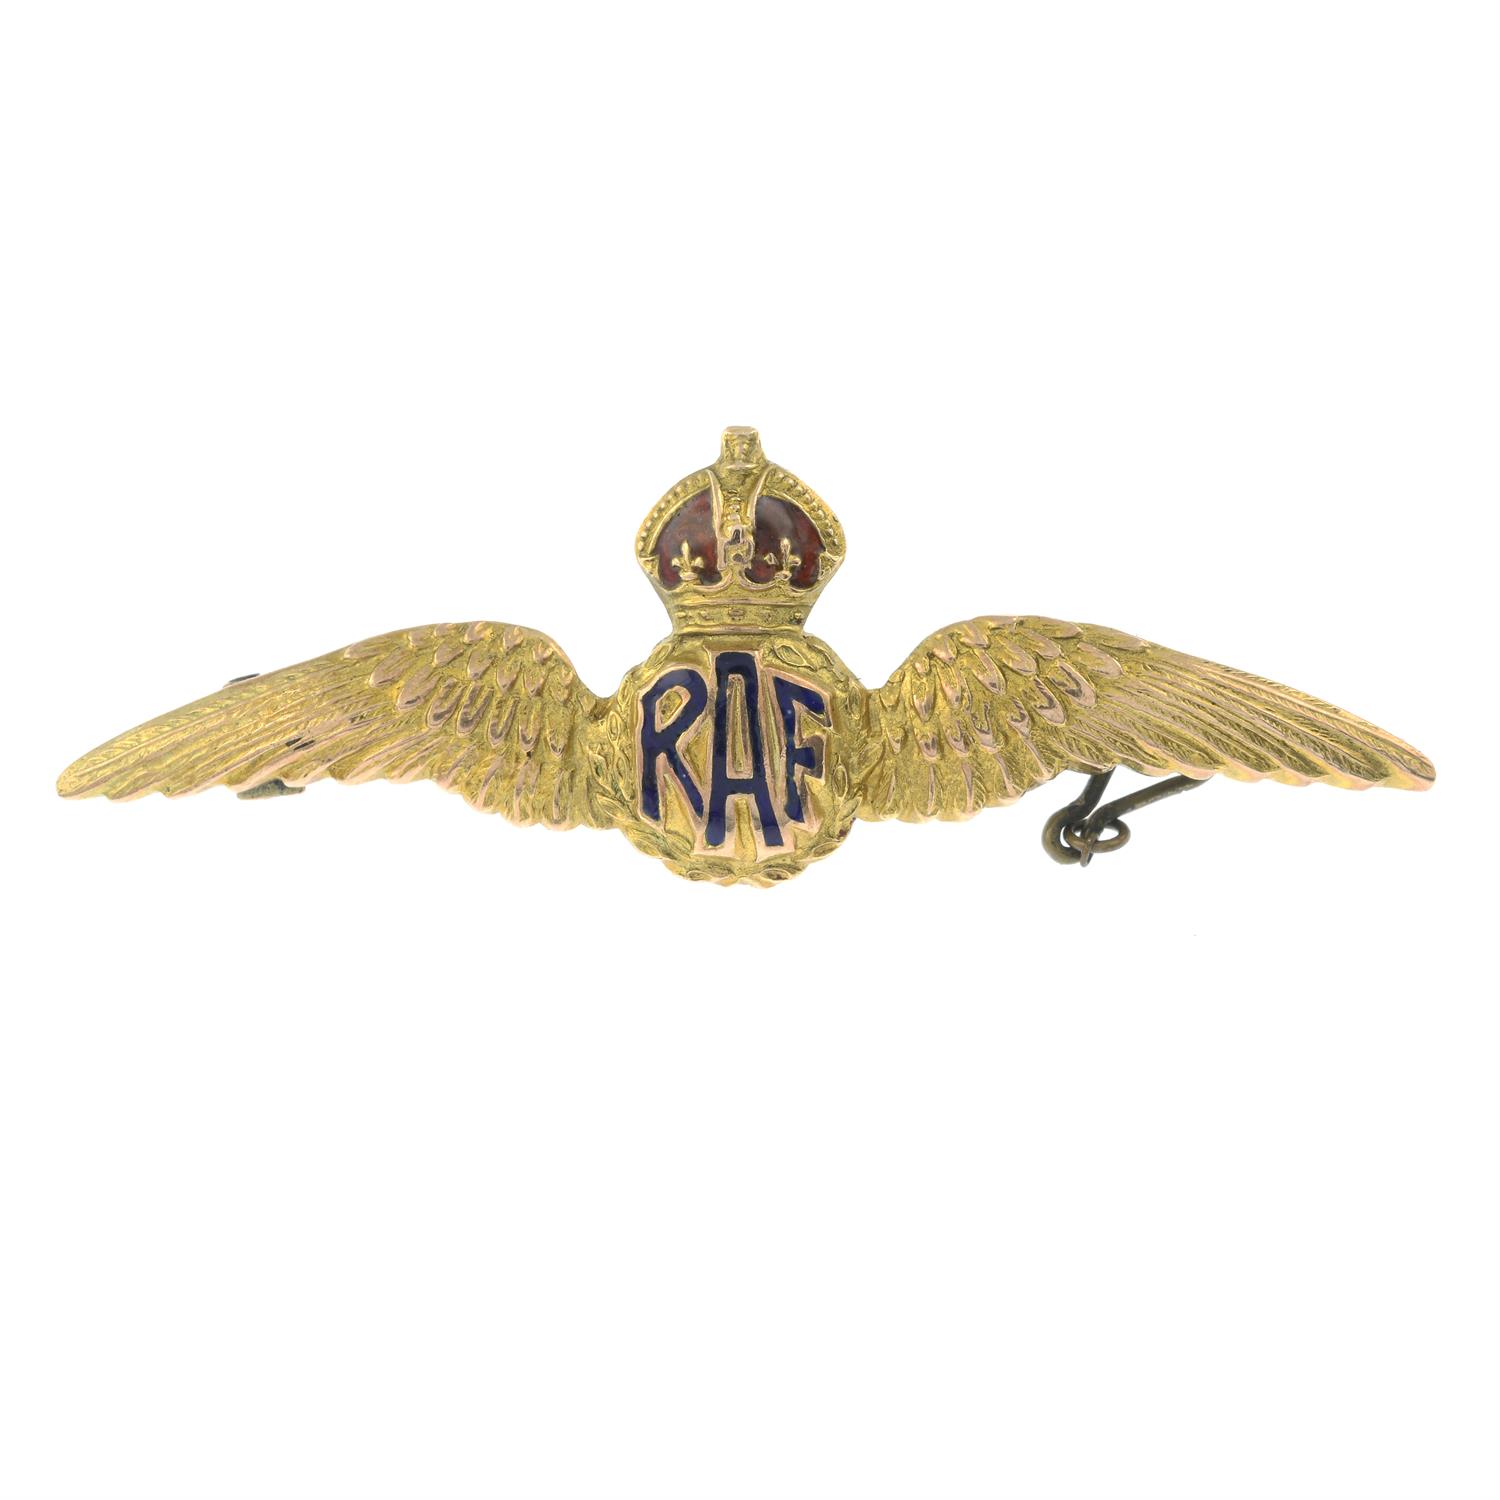 An early 20th century 9ct gold and enamel 'RAF' brooch.